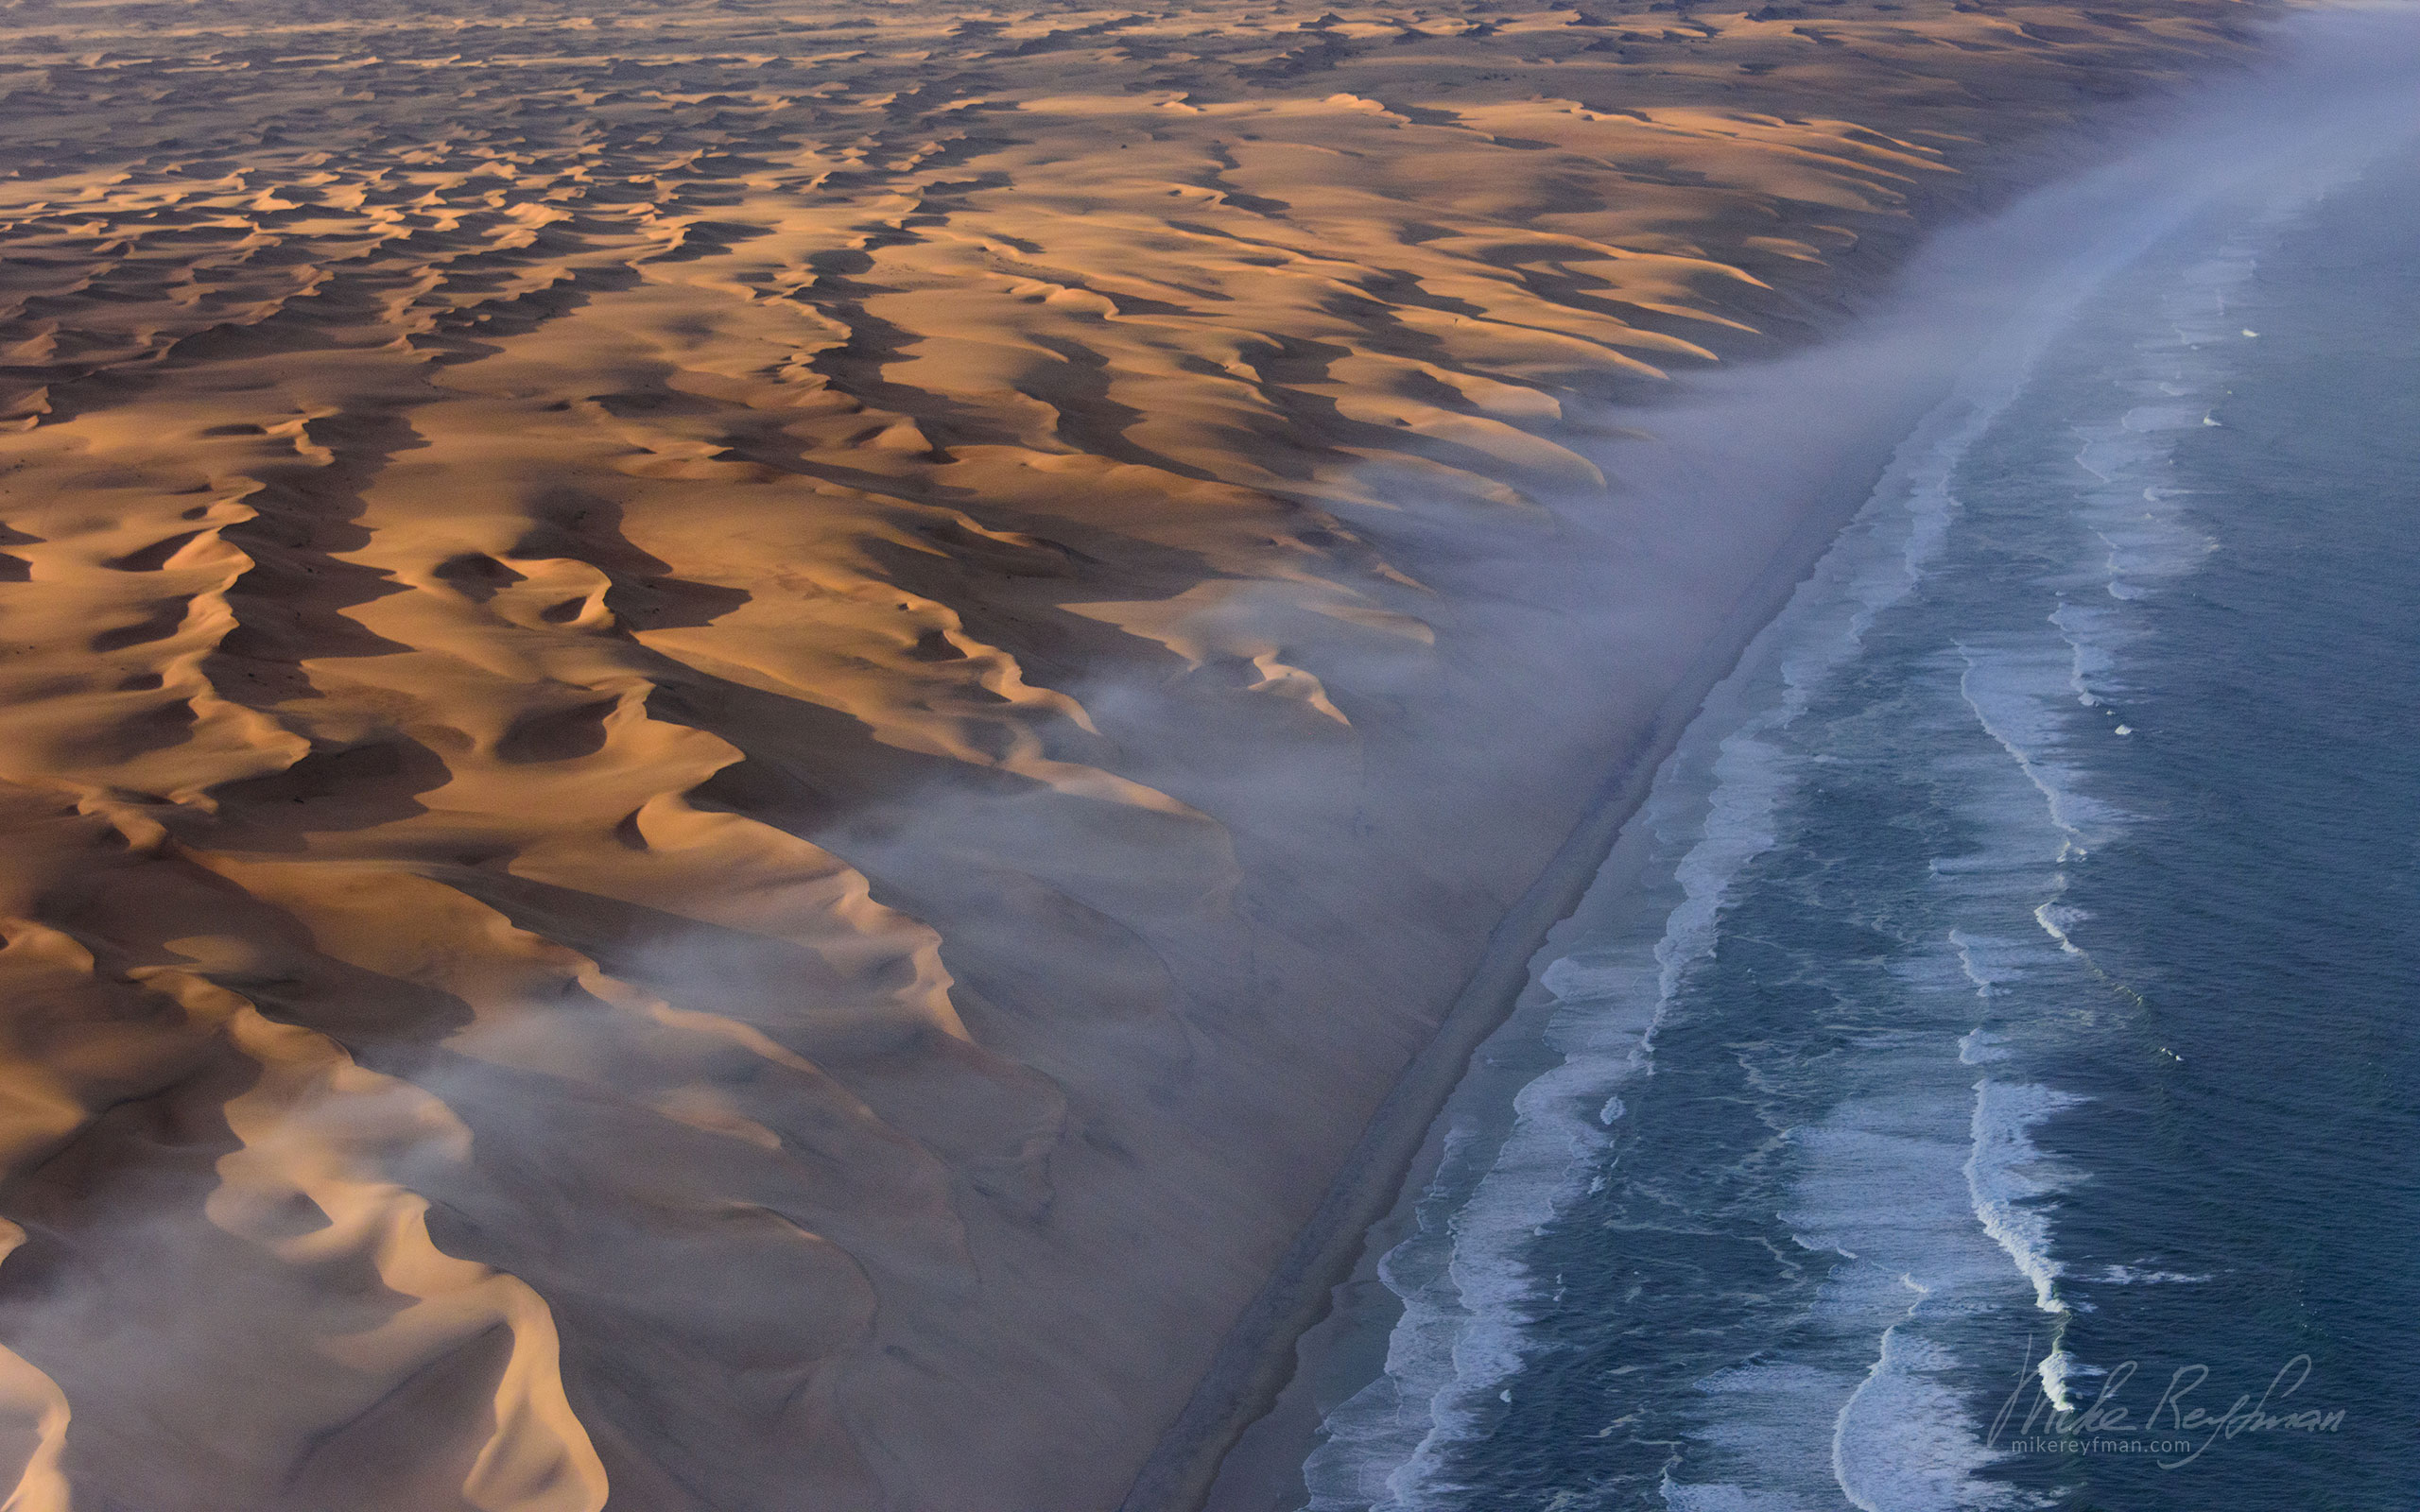 Where two oceans meet. Atlantic Ocean and sand dunes of the Skeleton Coast. Namib Skeleton Coast National Park, Namibia SCW_012_10P8357 - Shipwrecks and Endless Dunes of Namib Skeleton Coast NP, Dense ocean fogs of the Benguela Current, Cape Fur seals, and Walvis Bay Salt Works. Namibia.  - Mike Reyfman Photography